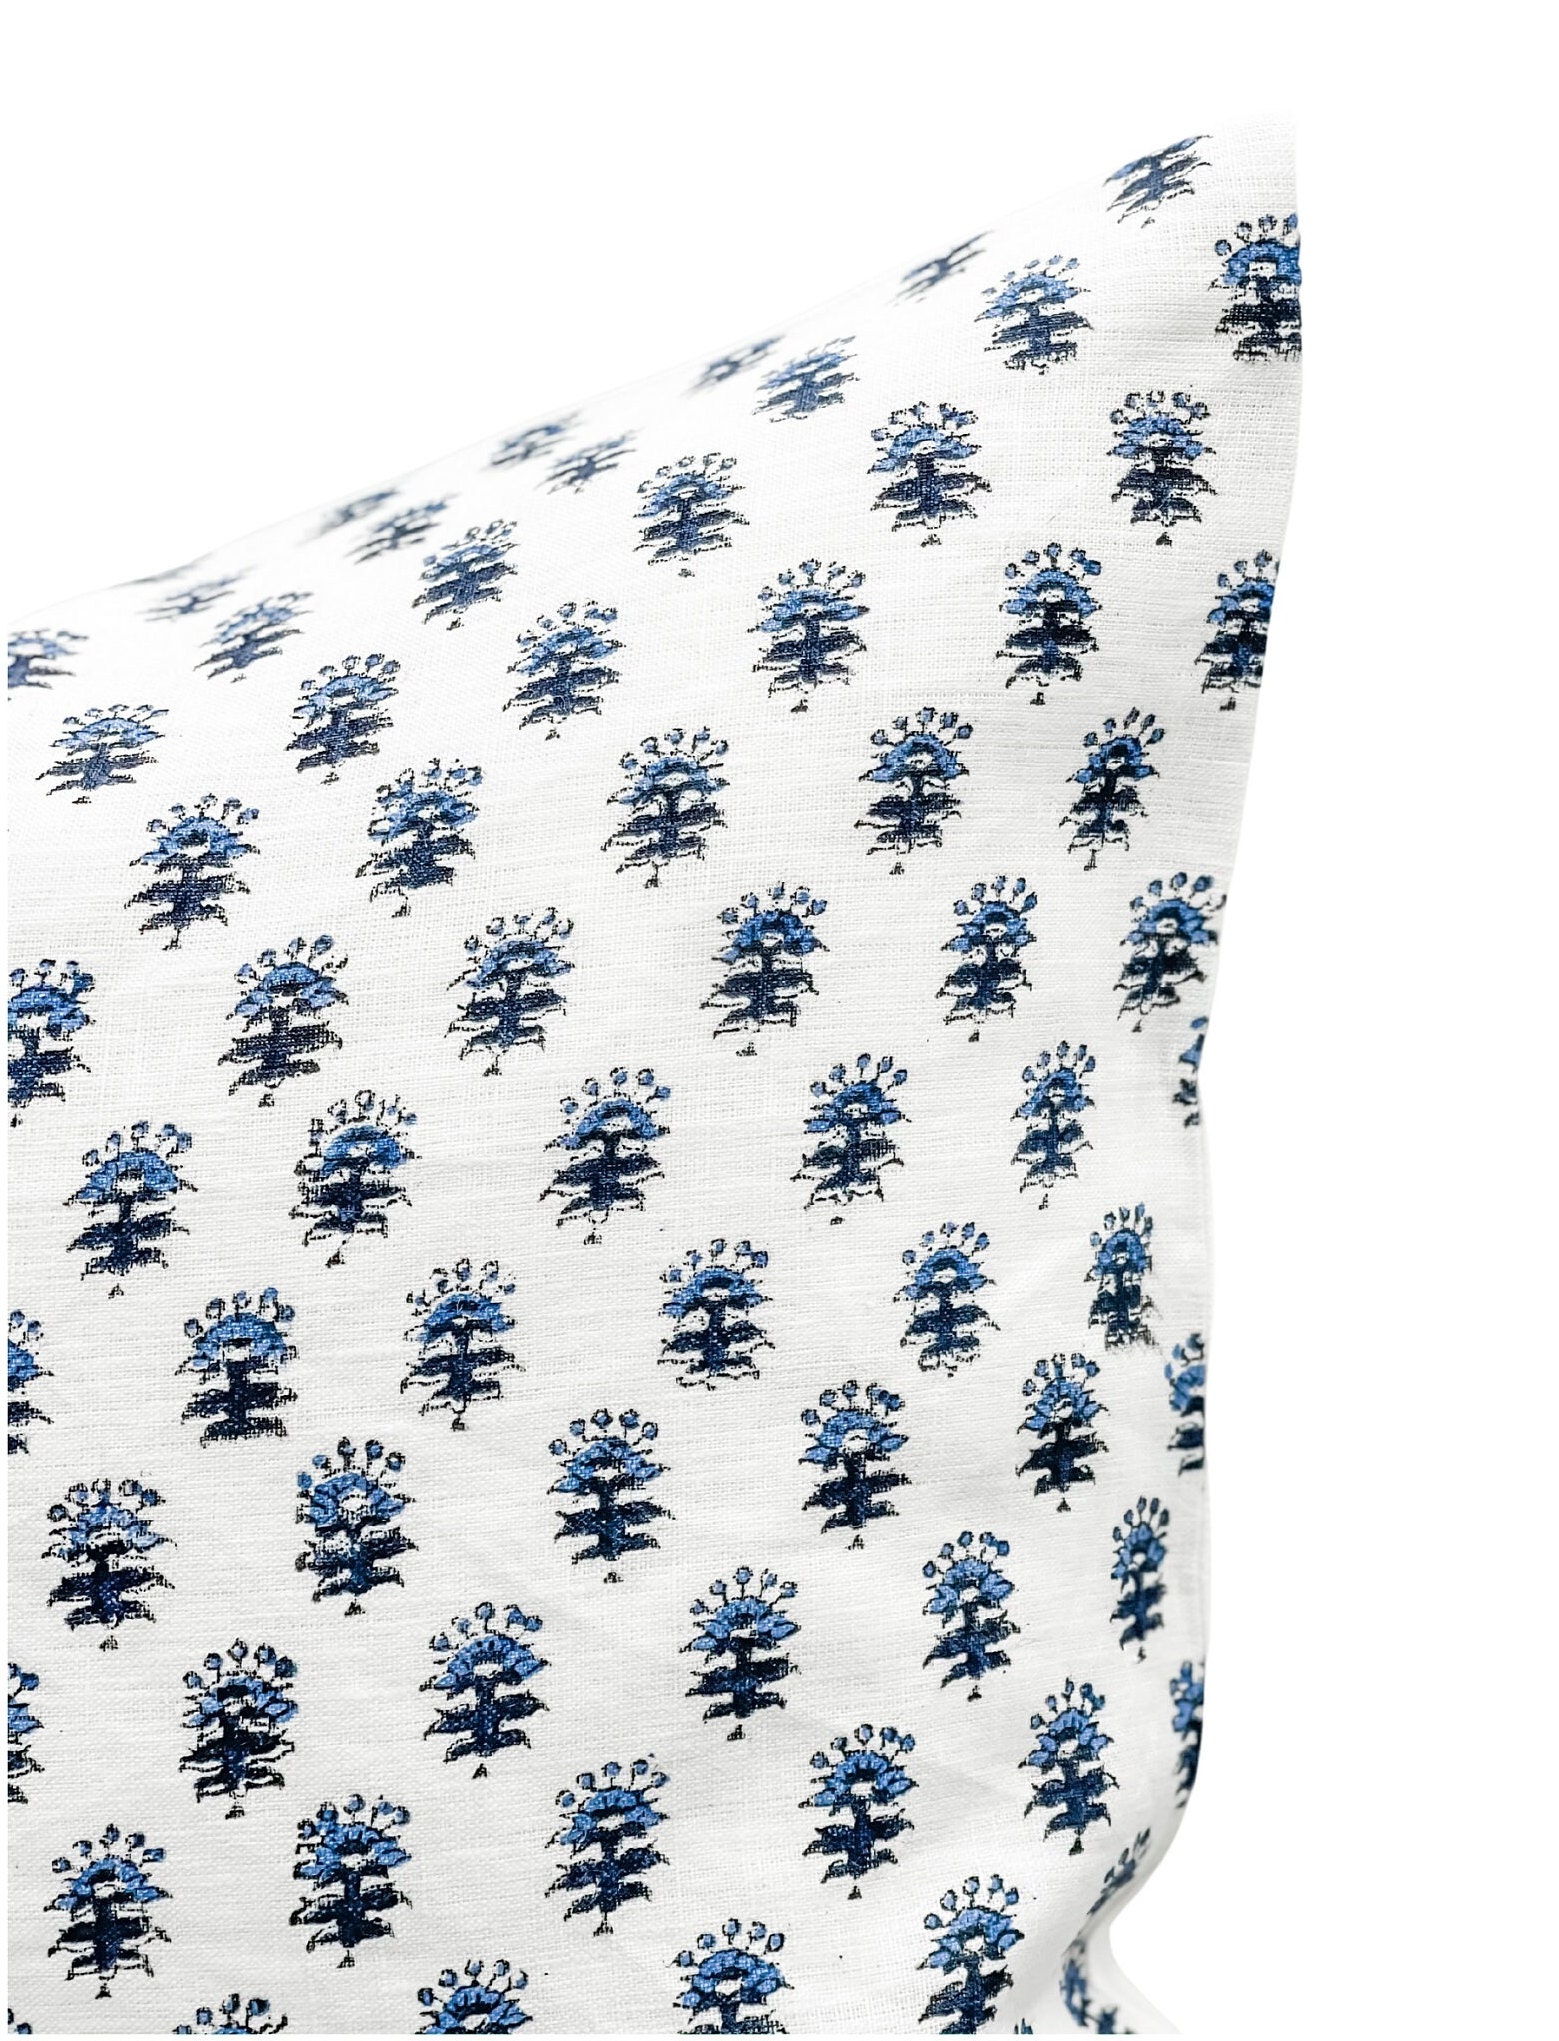 Designer Floral Rock Grey With Navy Blue on off White Linen Pillow Cover,  Small Flowers Pillow Cover, Boho Pillow, Decorative Throw Pillow 